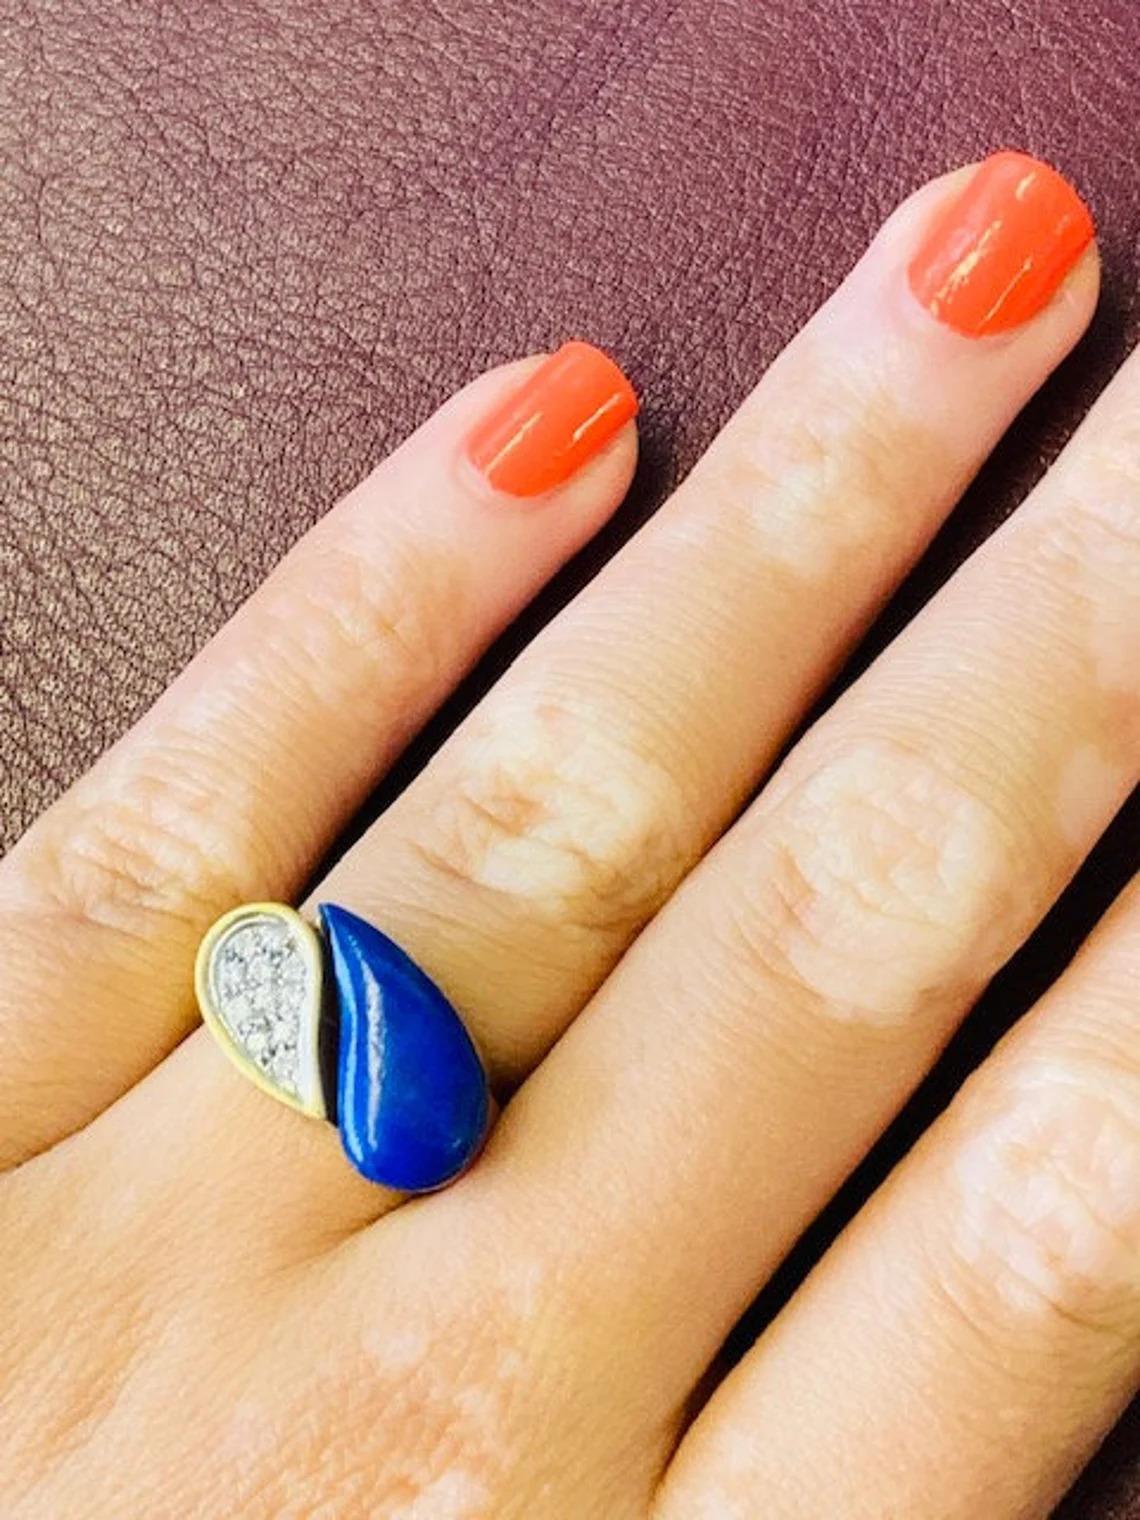 Vintage 18k Gold Lapis Lazuli and Diamond Teardrop Ring, One-of-a-kind

This eye-catching piece from the 1980s is the ideal ring for everyday wear, or for a special occasion. The lapis lazuli is guaranteed to add a beautiful splash of colour to